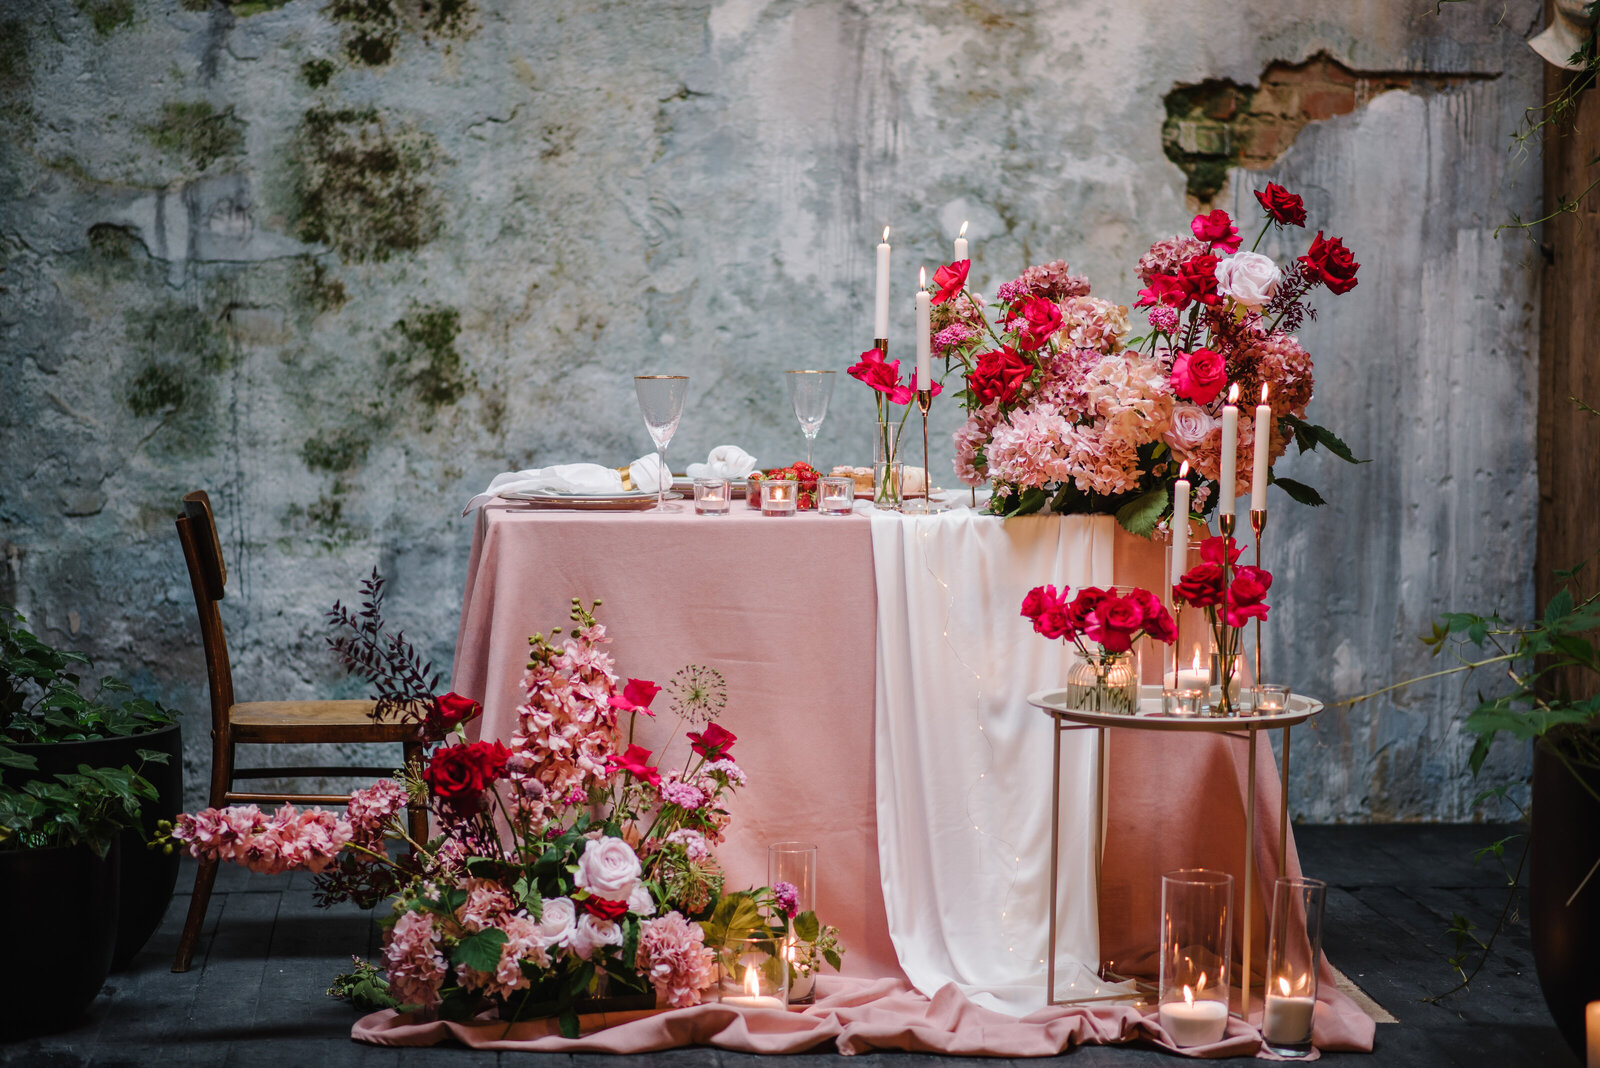 Romantic Proposal Setup from Essence of Flair